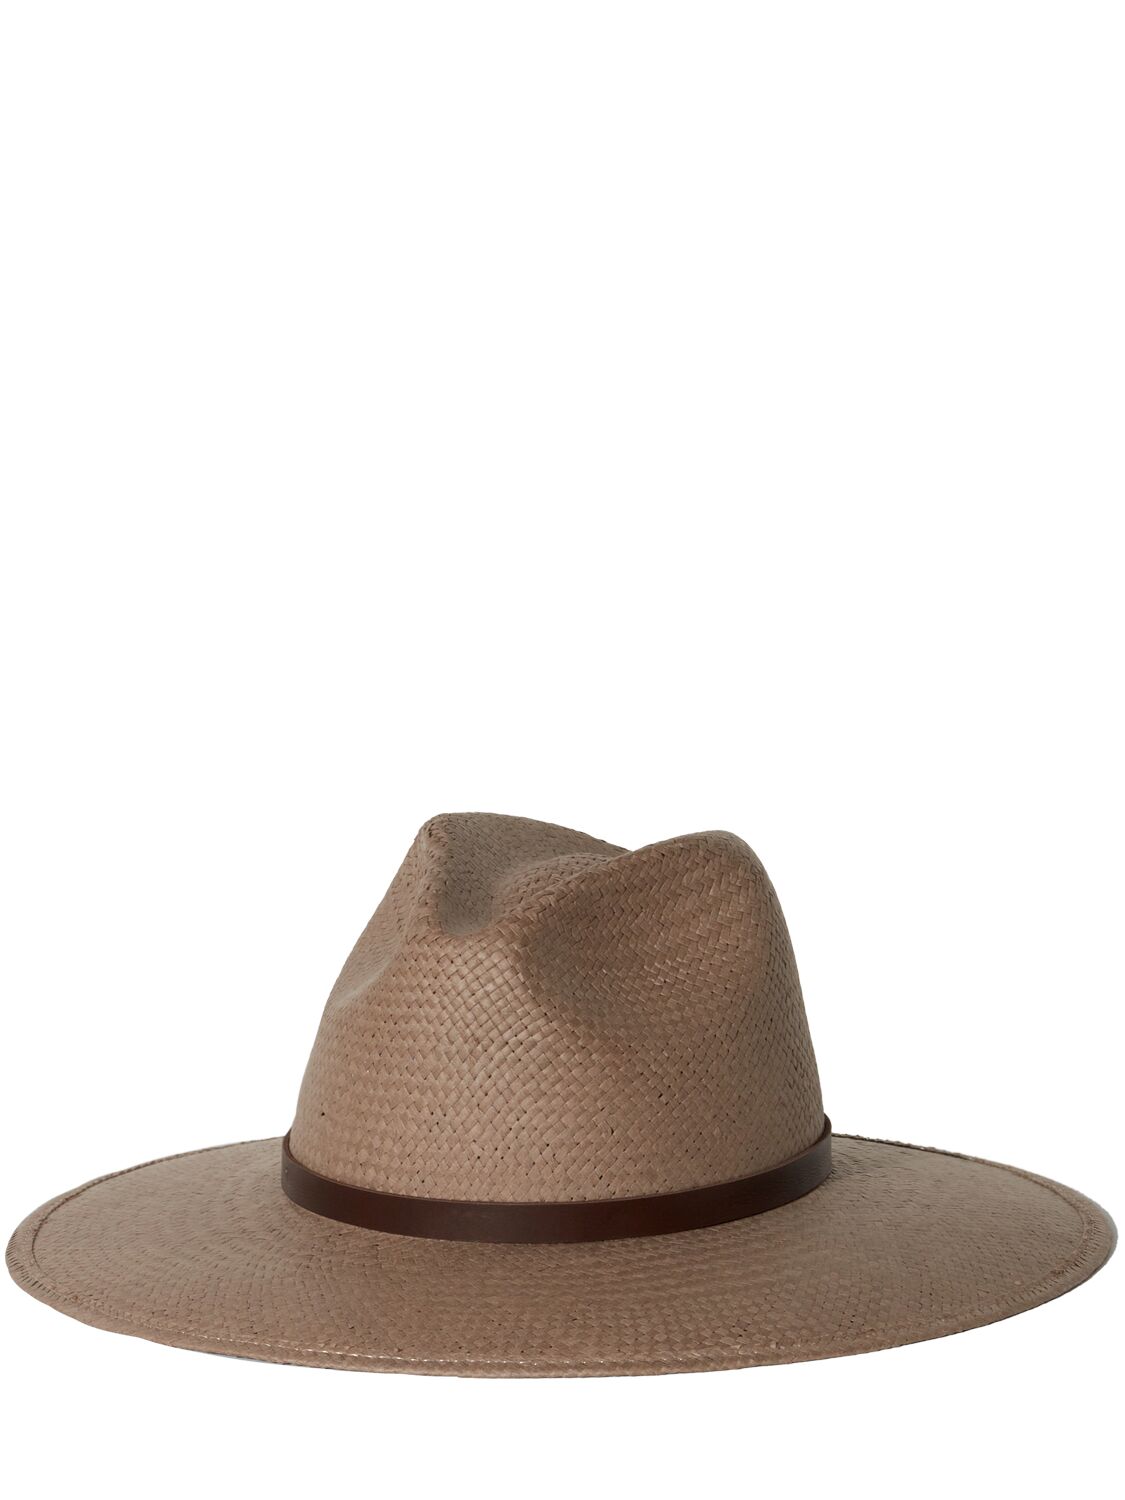 Janessa Leone Judith Packable Fedora Hat In Taupe